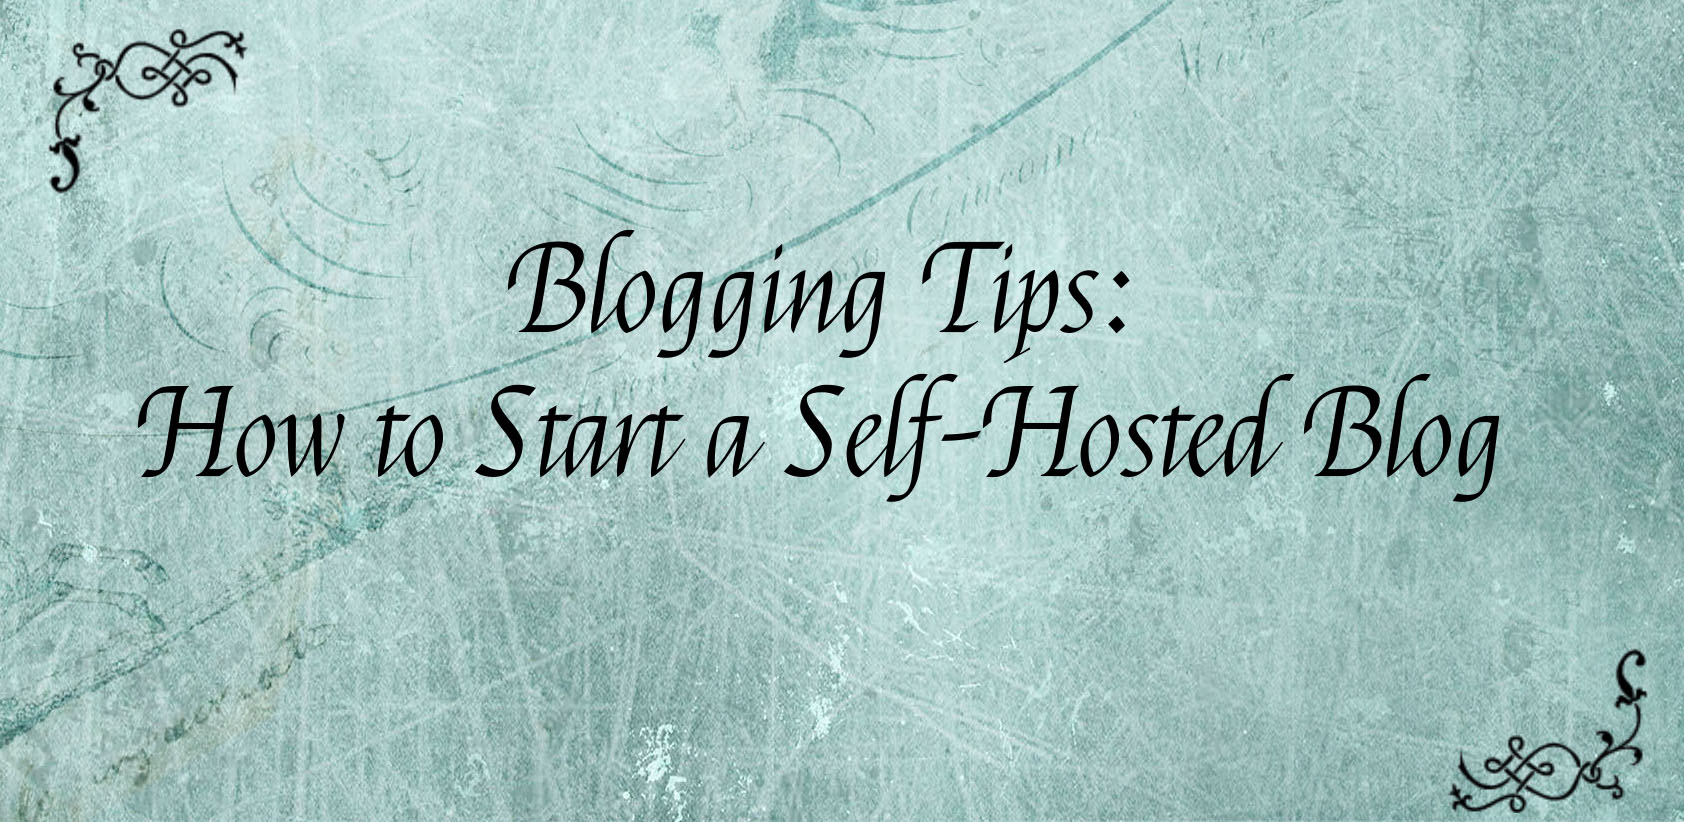 Blogging Tips – How to Start a Self-Hosted Blog